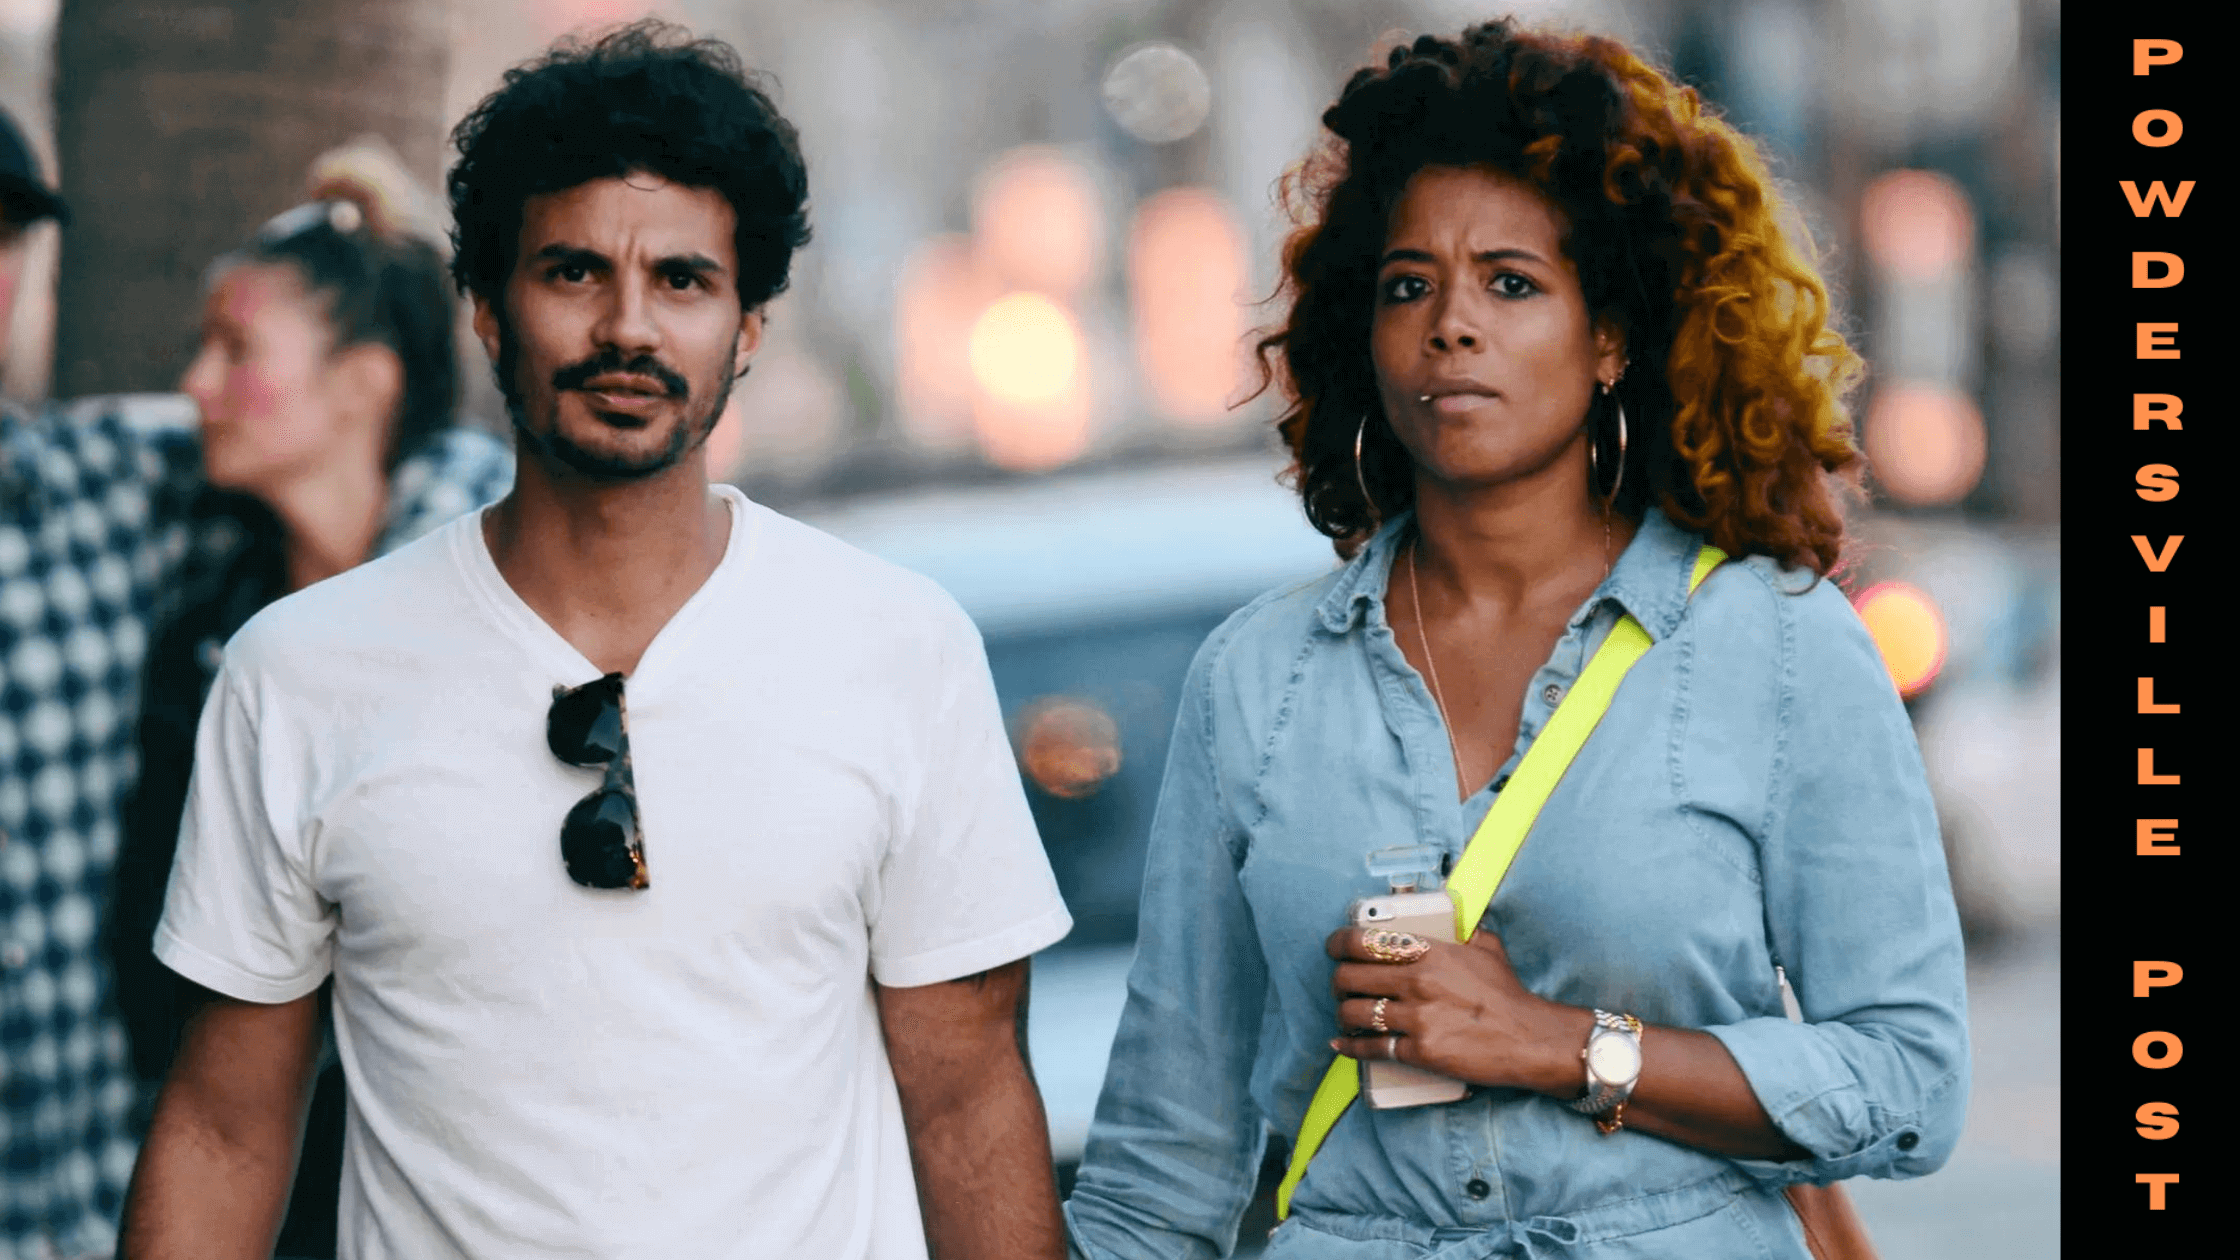 Popular Singer Kelis' Husband Mike Mora Passed Away After Losing The Battle With Cancer